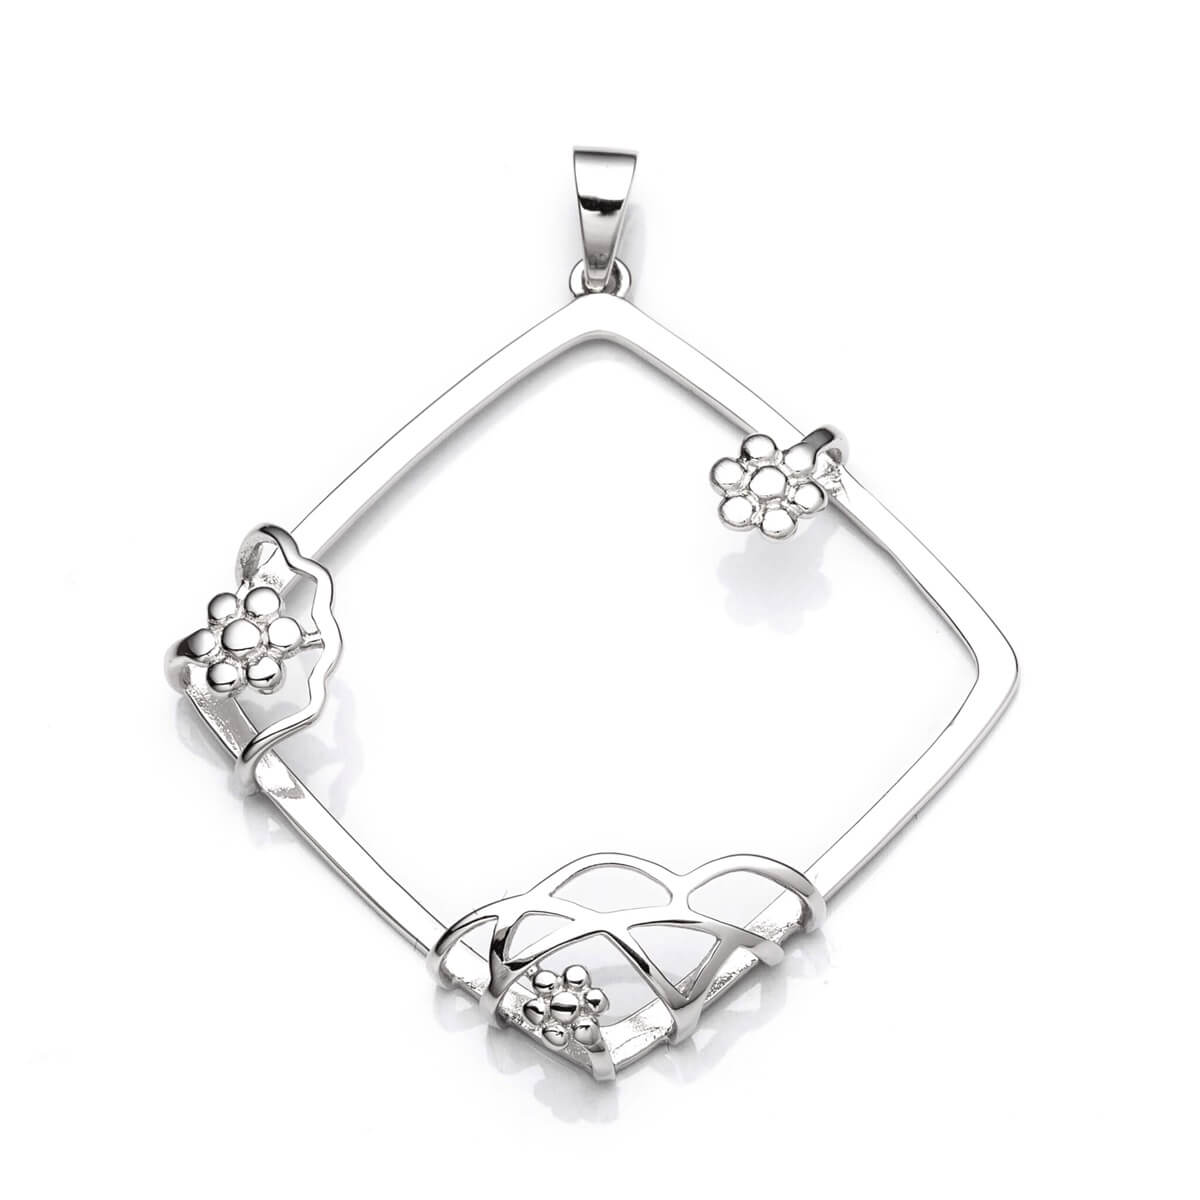 Diamond Pendant with Square Bezel Mounting and Bail in Sterling Silver 35x35mm 